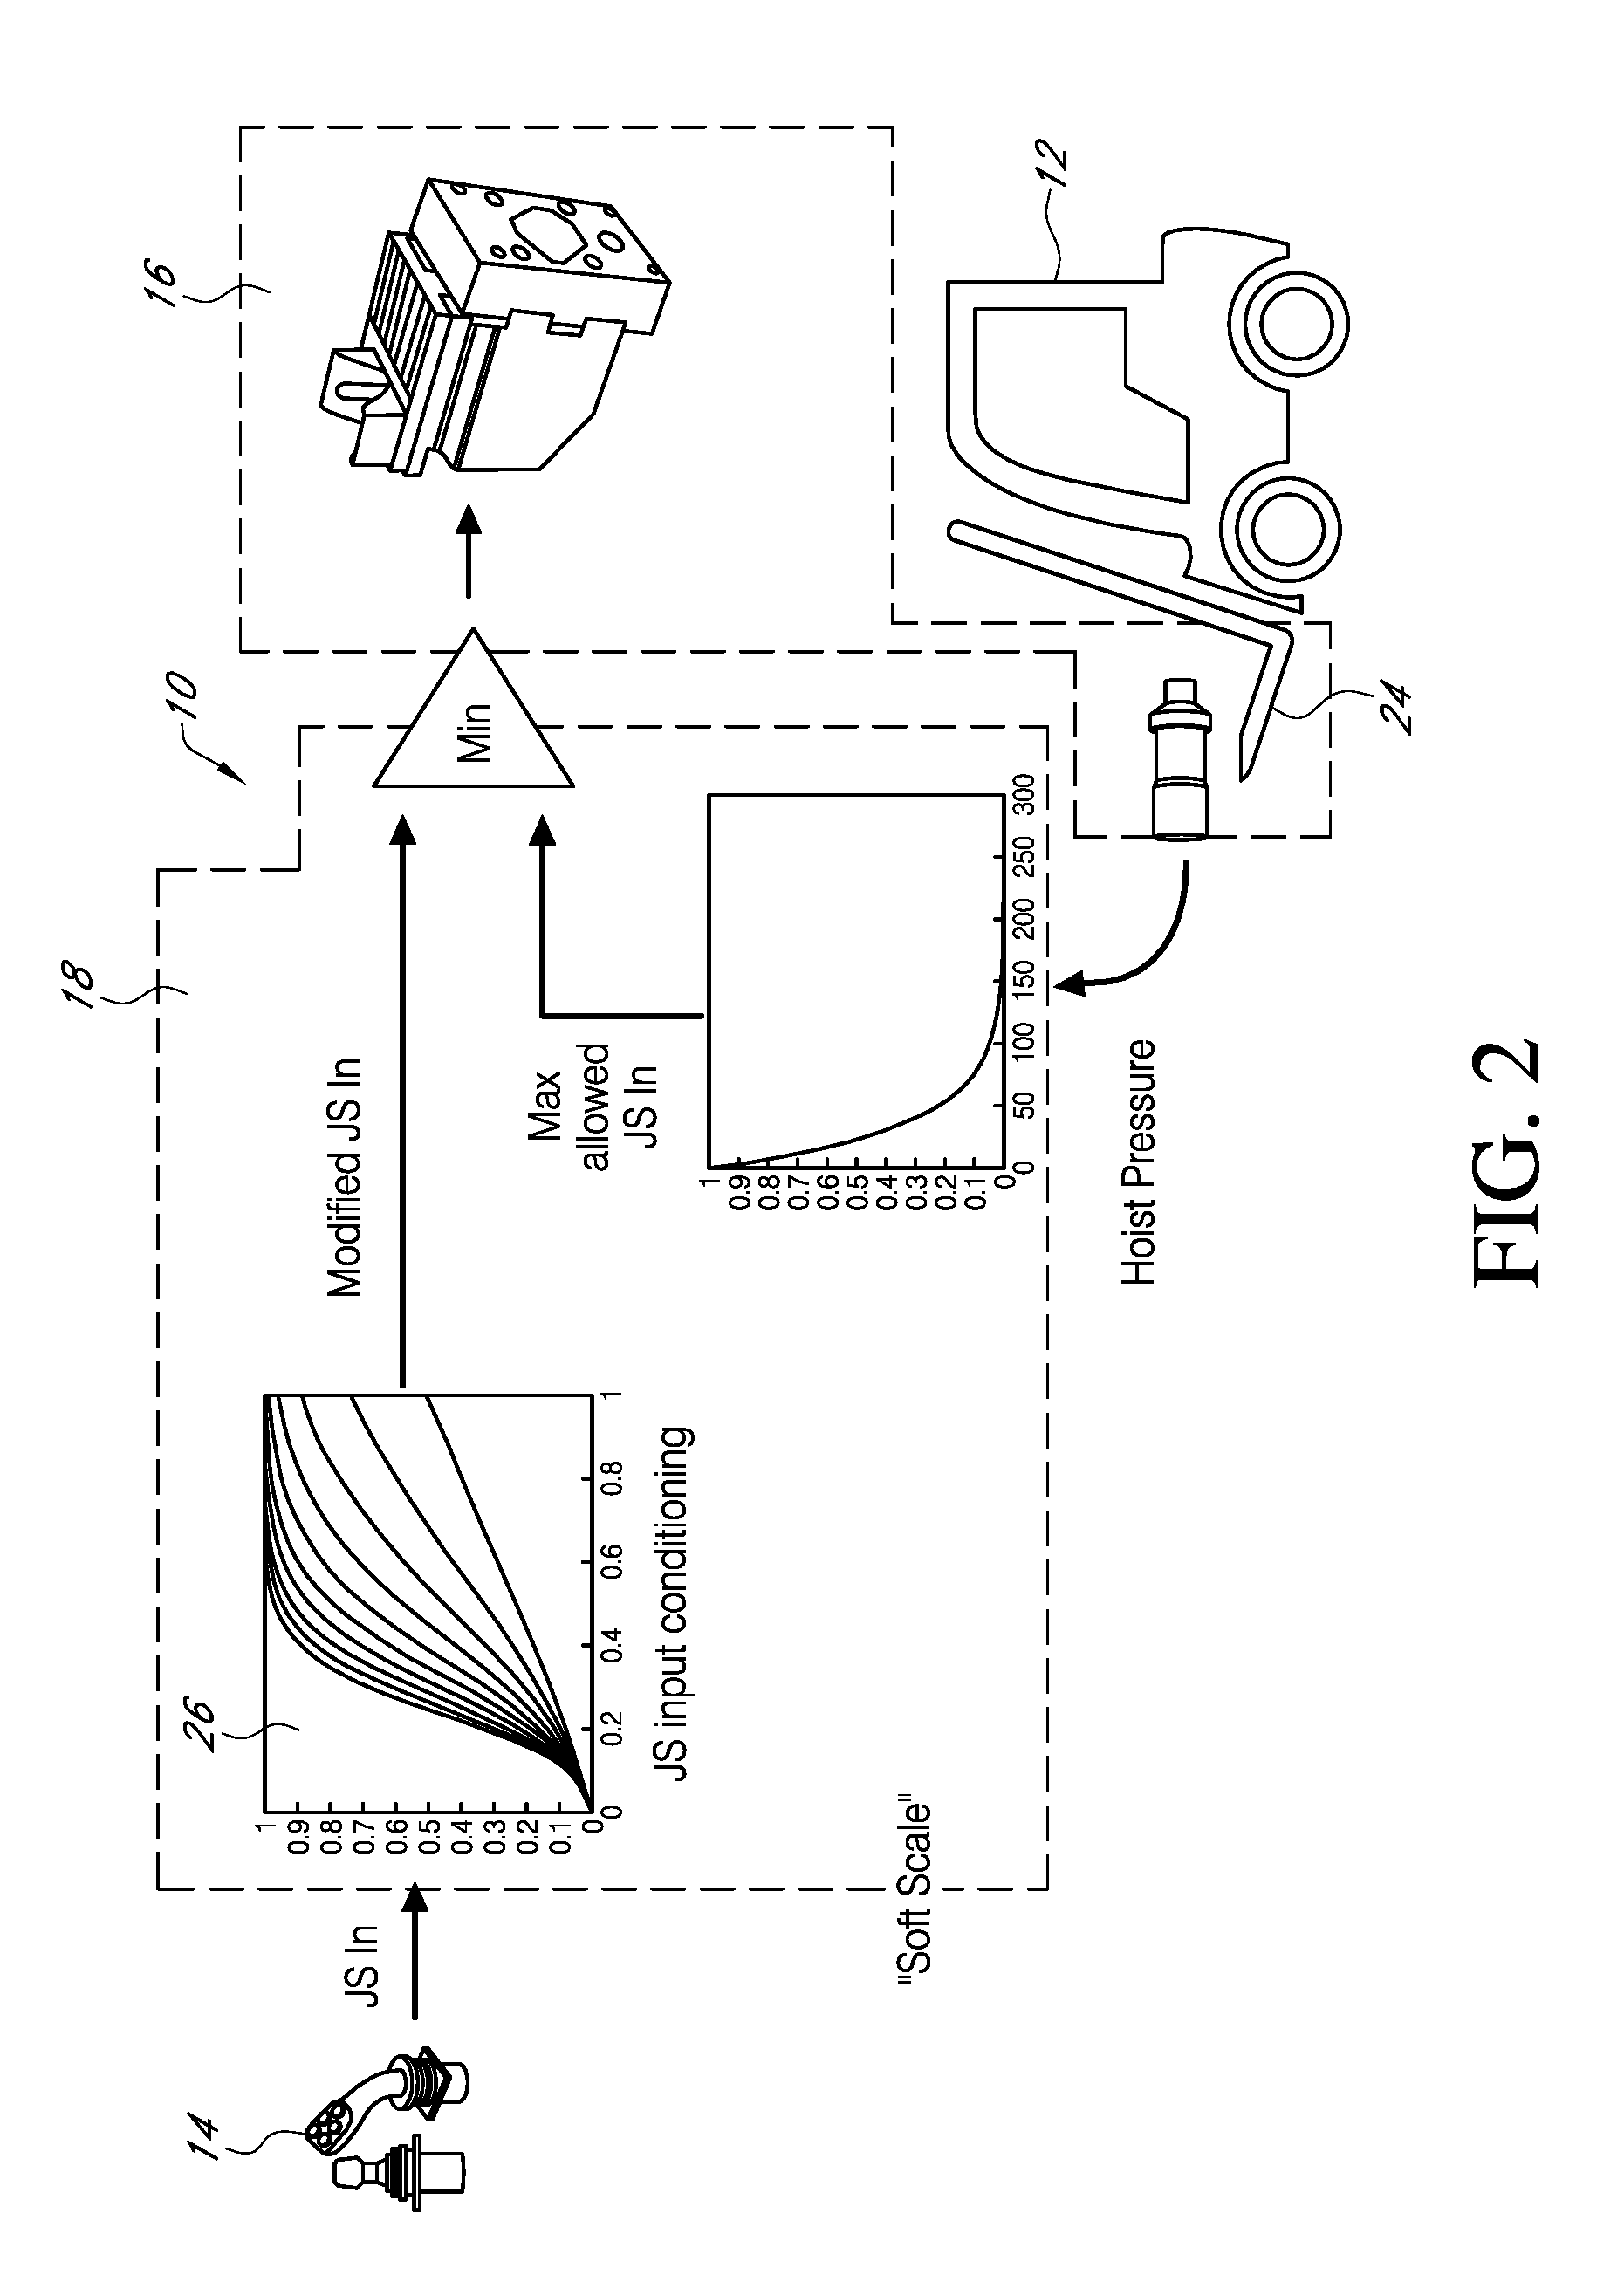 Load dependent electronic valve actuator regulation and pressure compensation